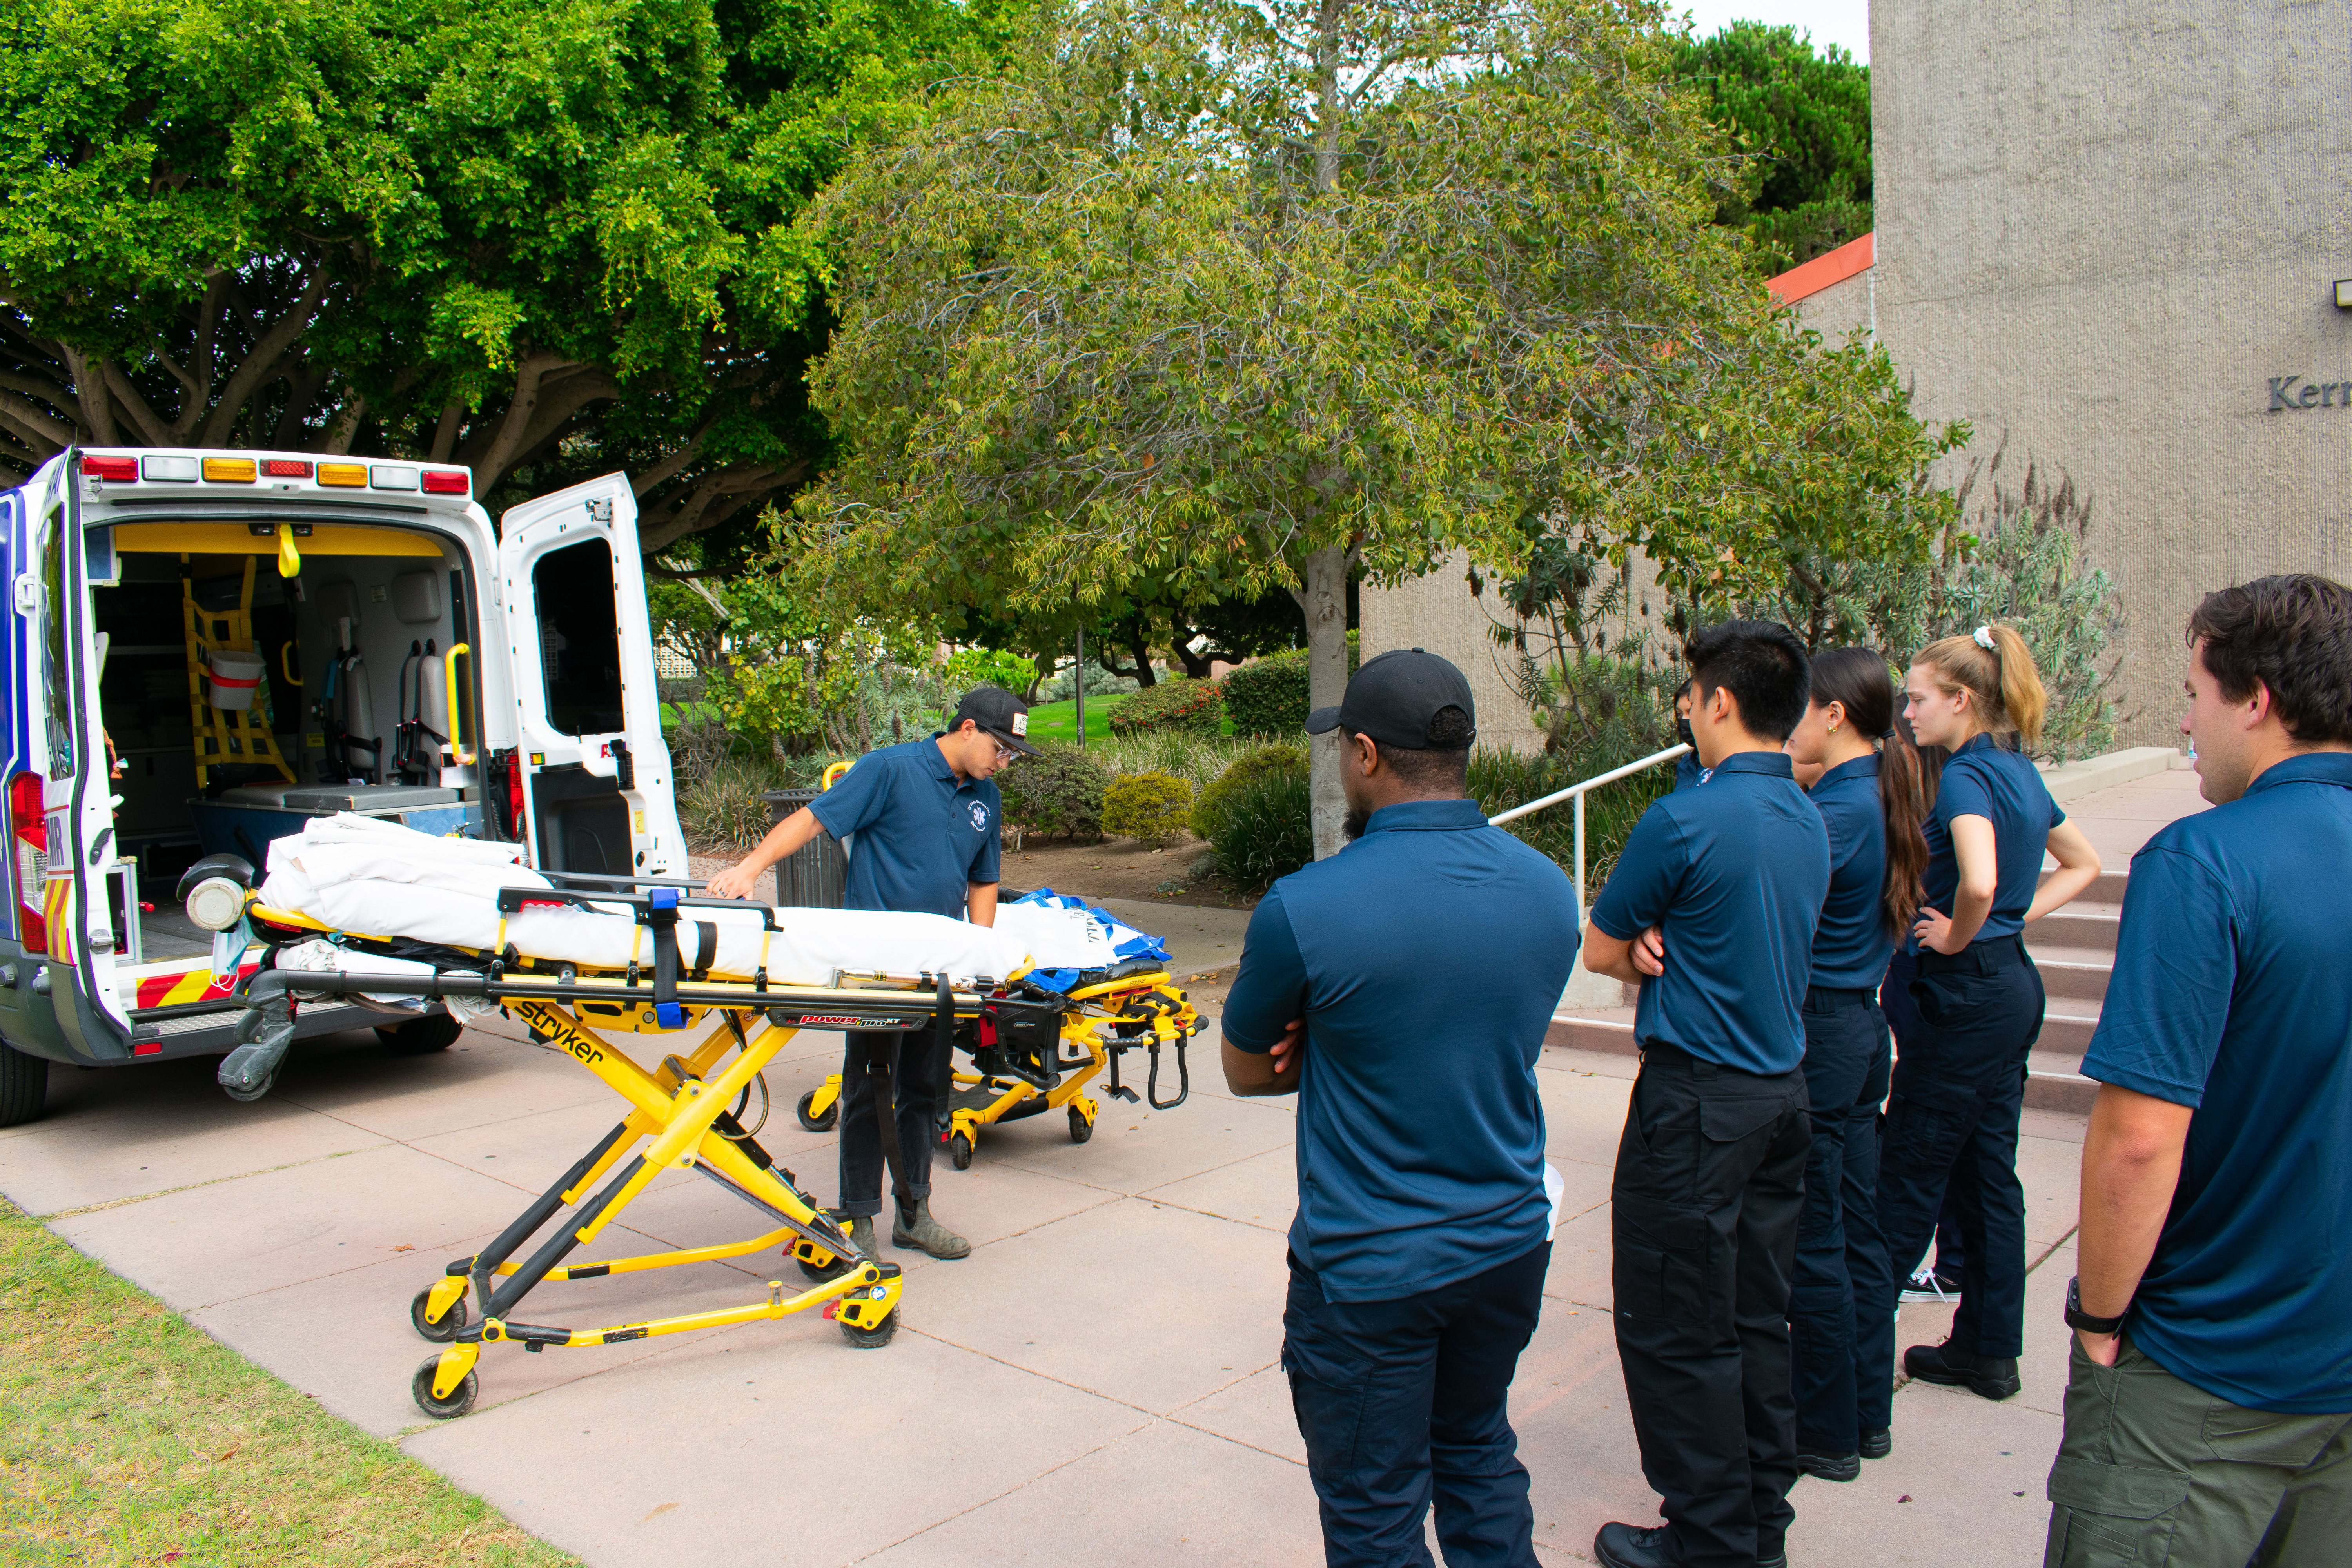 EMT Instructor showing the gurney in front of an ambulance vehicle to a handful of EMT students